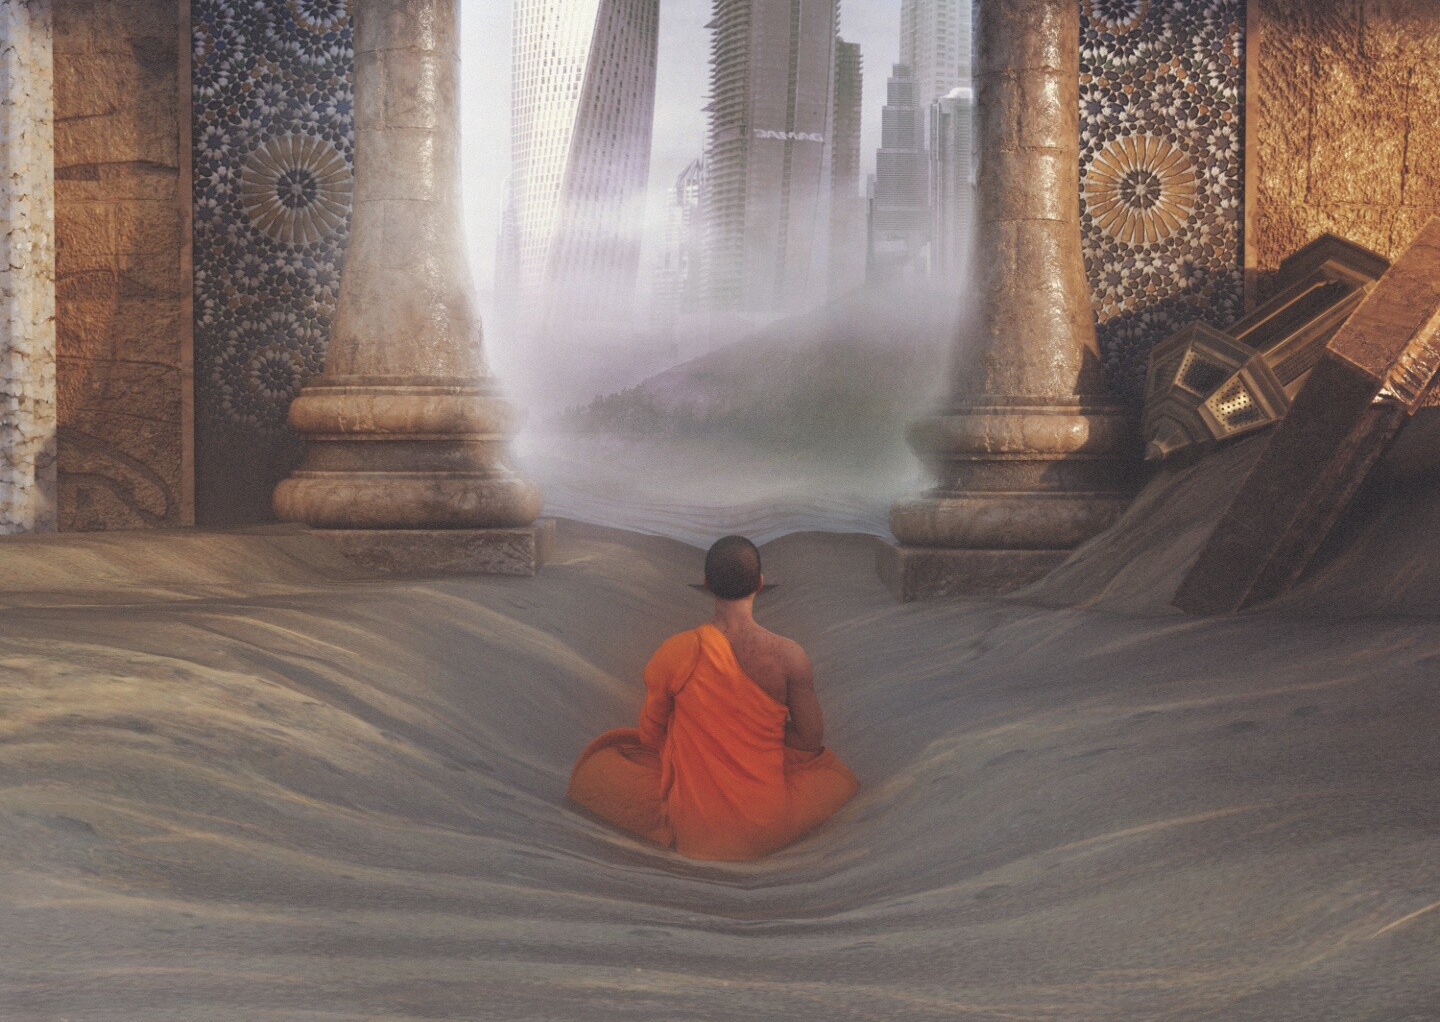 An art piece of a monk meditating in a temple with skyscrapers outside in the distance.